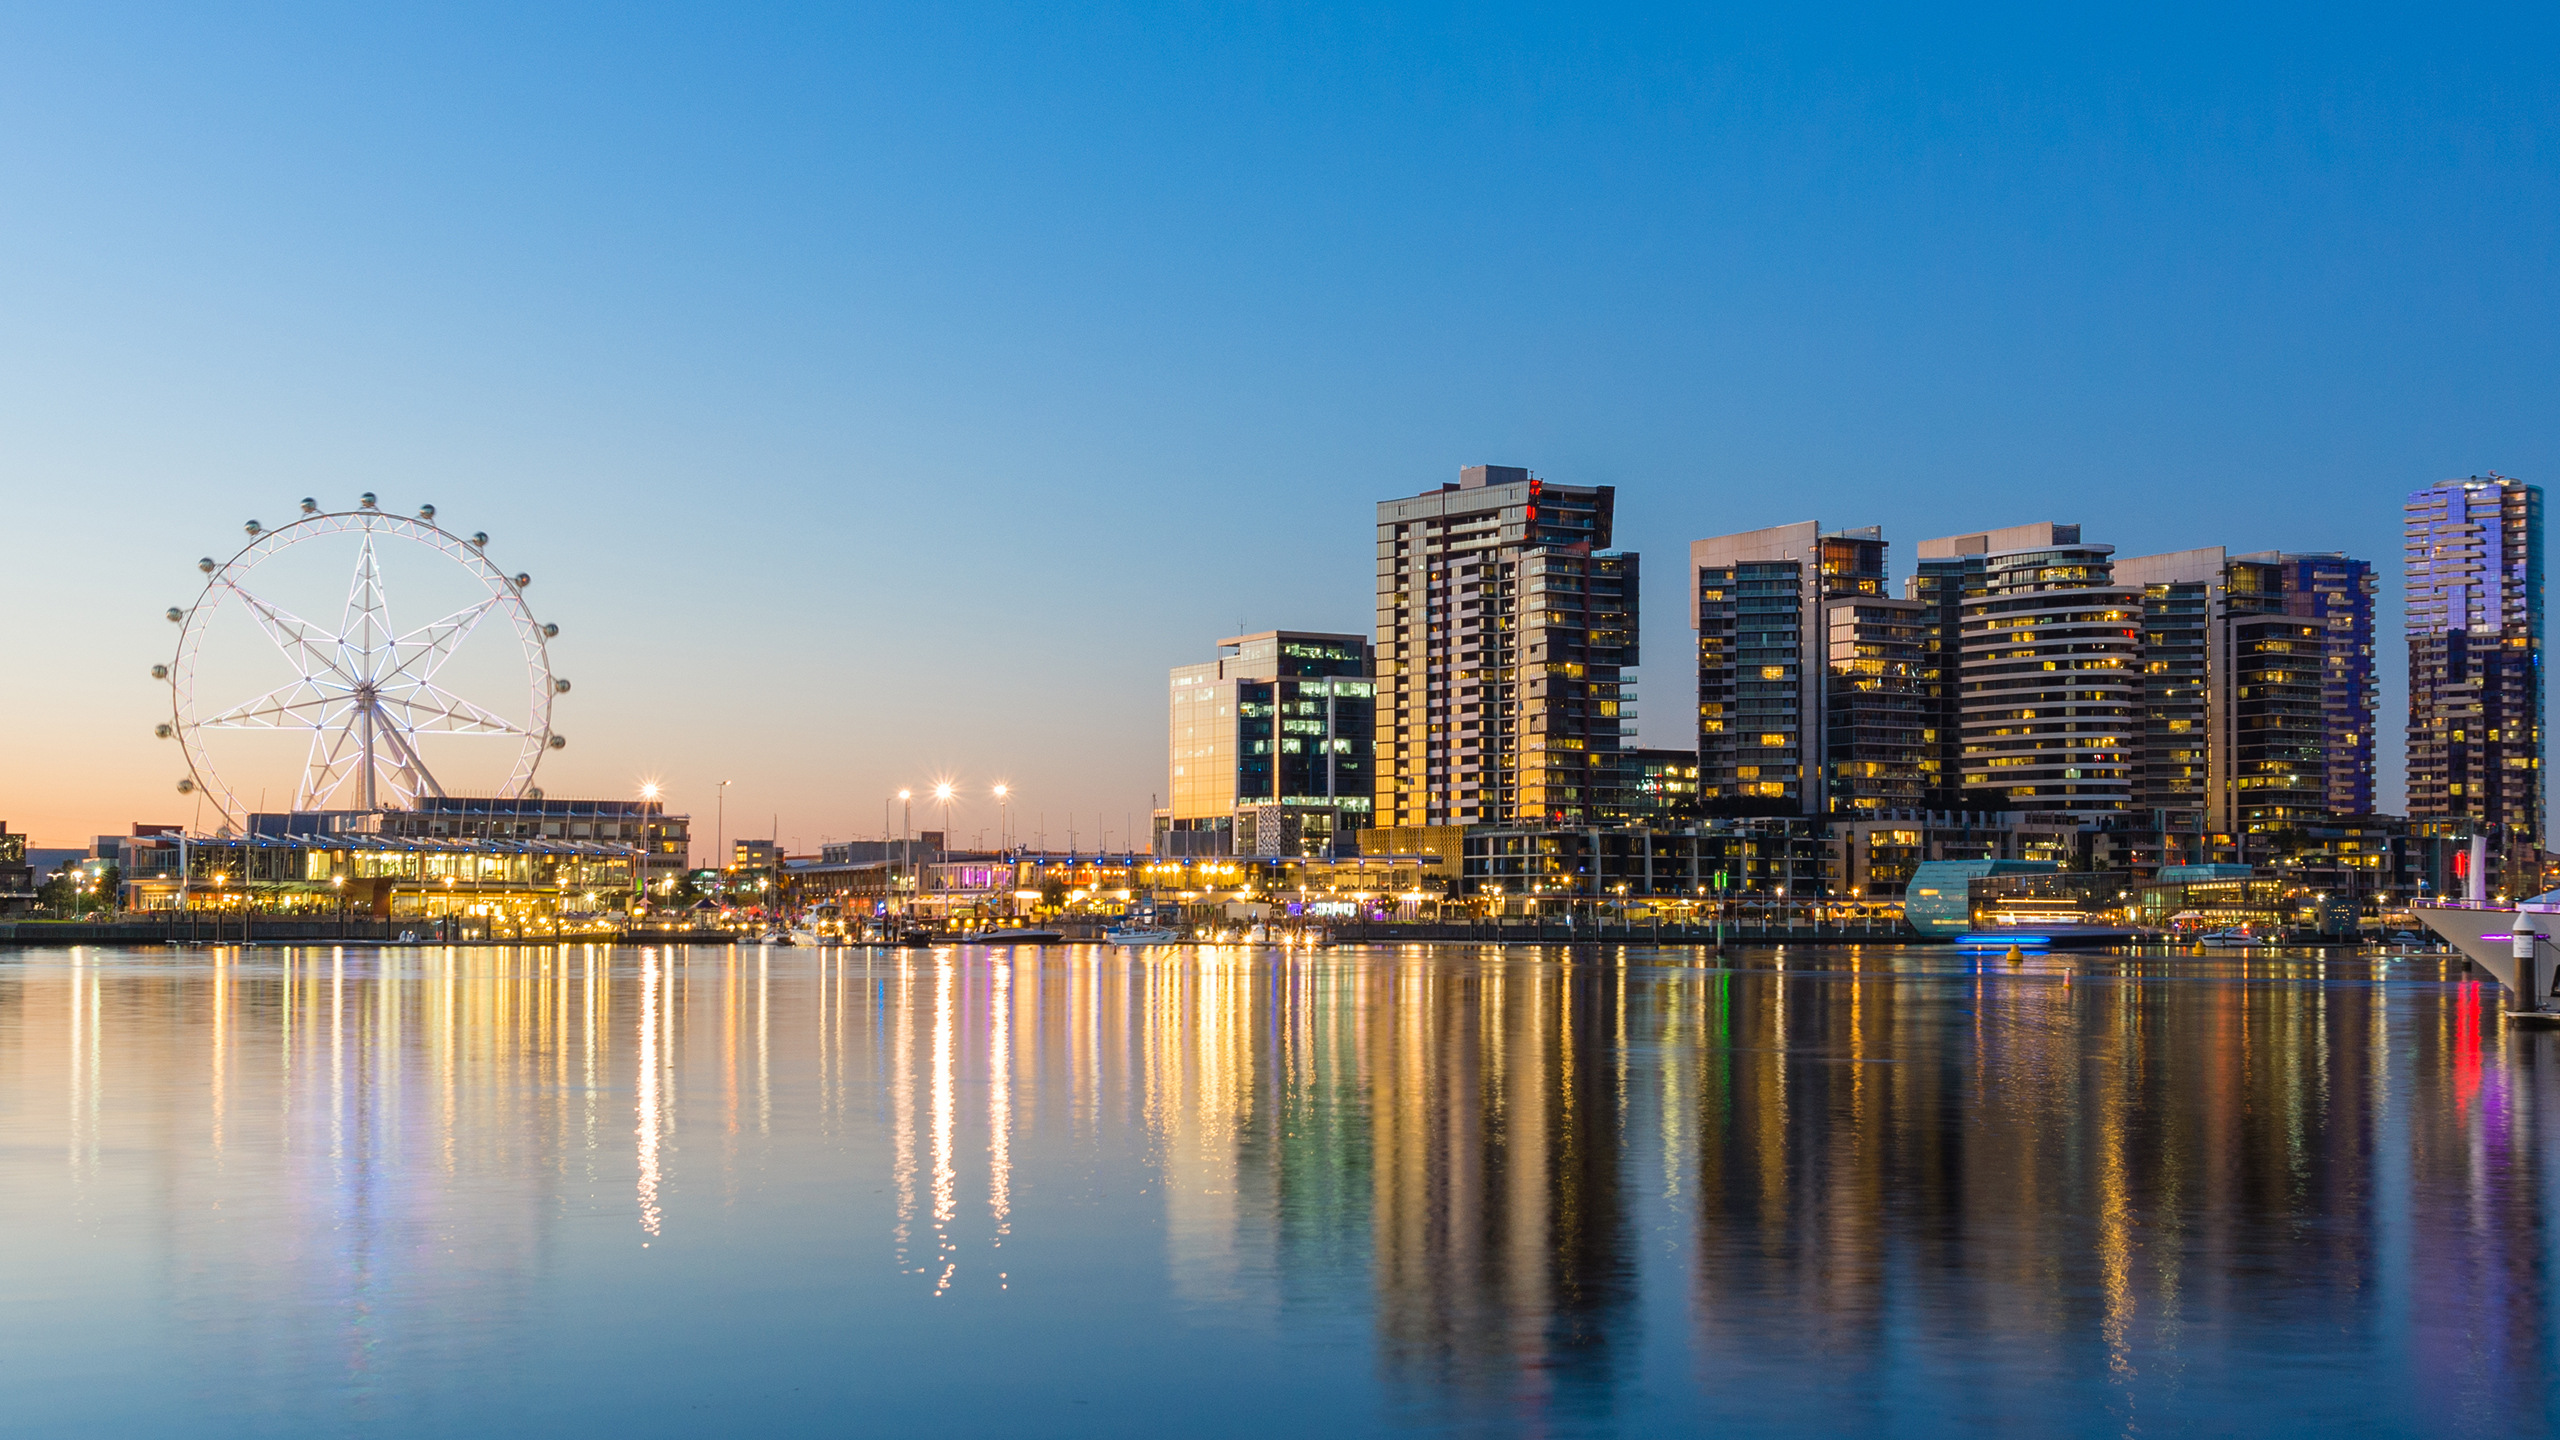 Panoramic image of the docklands waterfront area of Melbourne at night